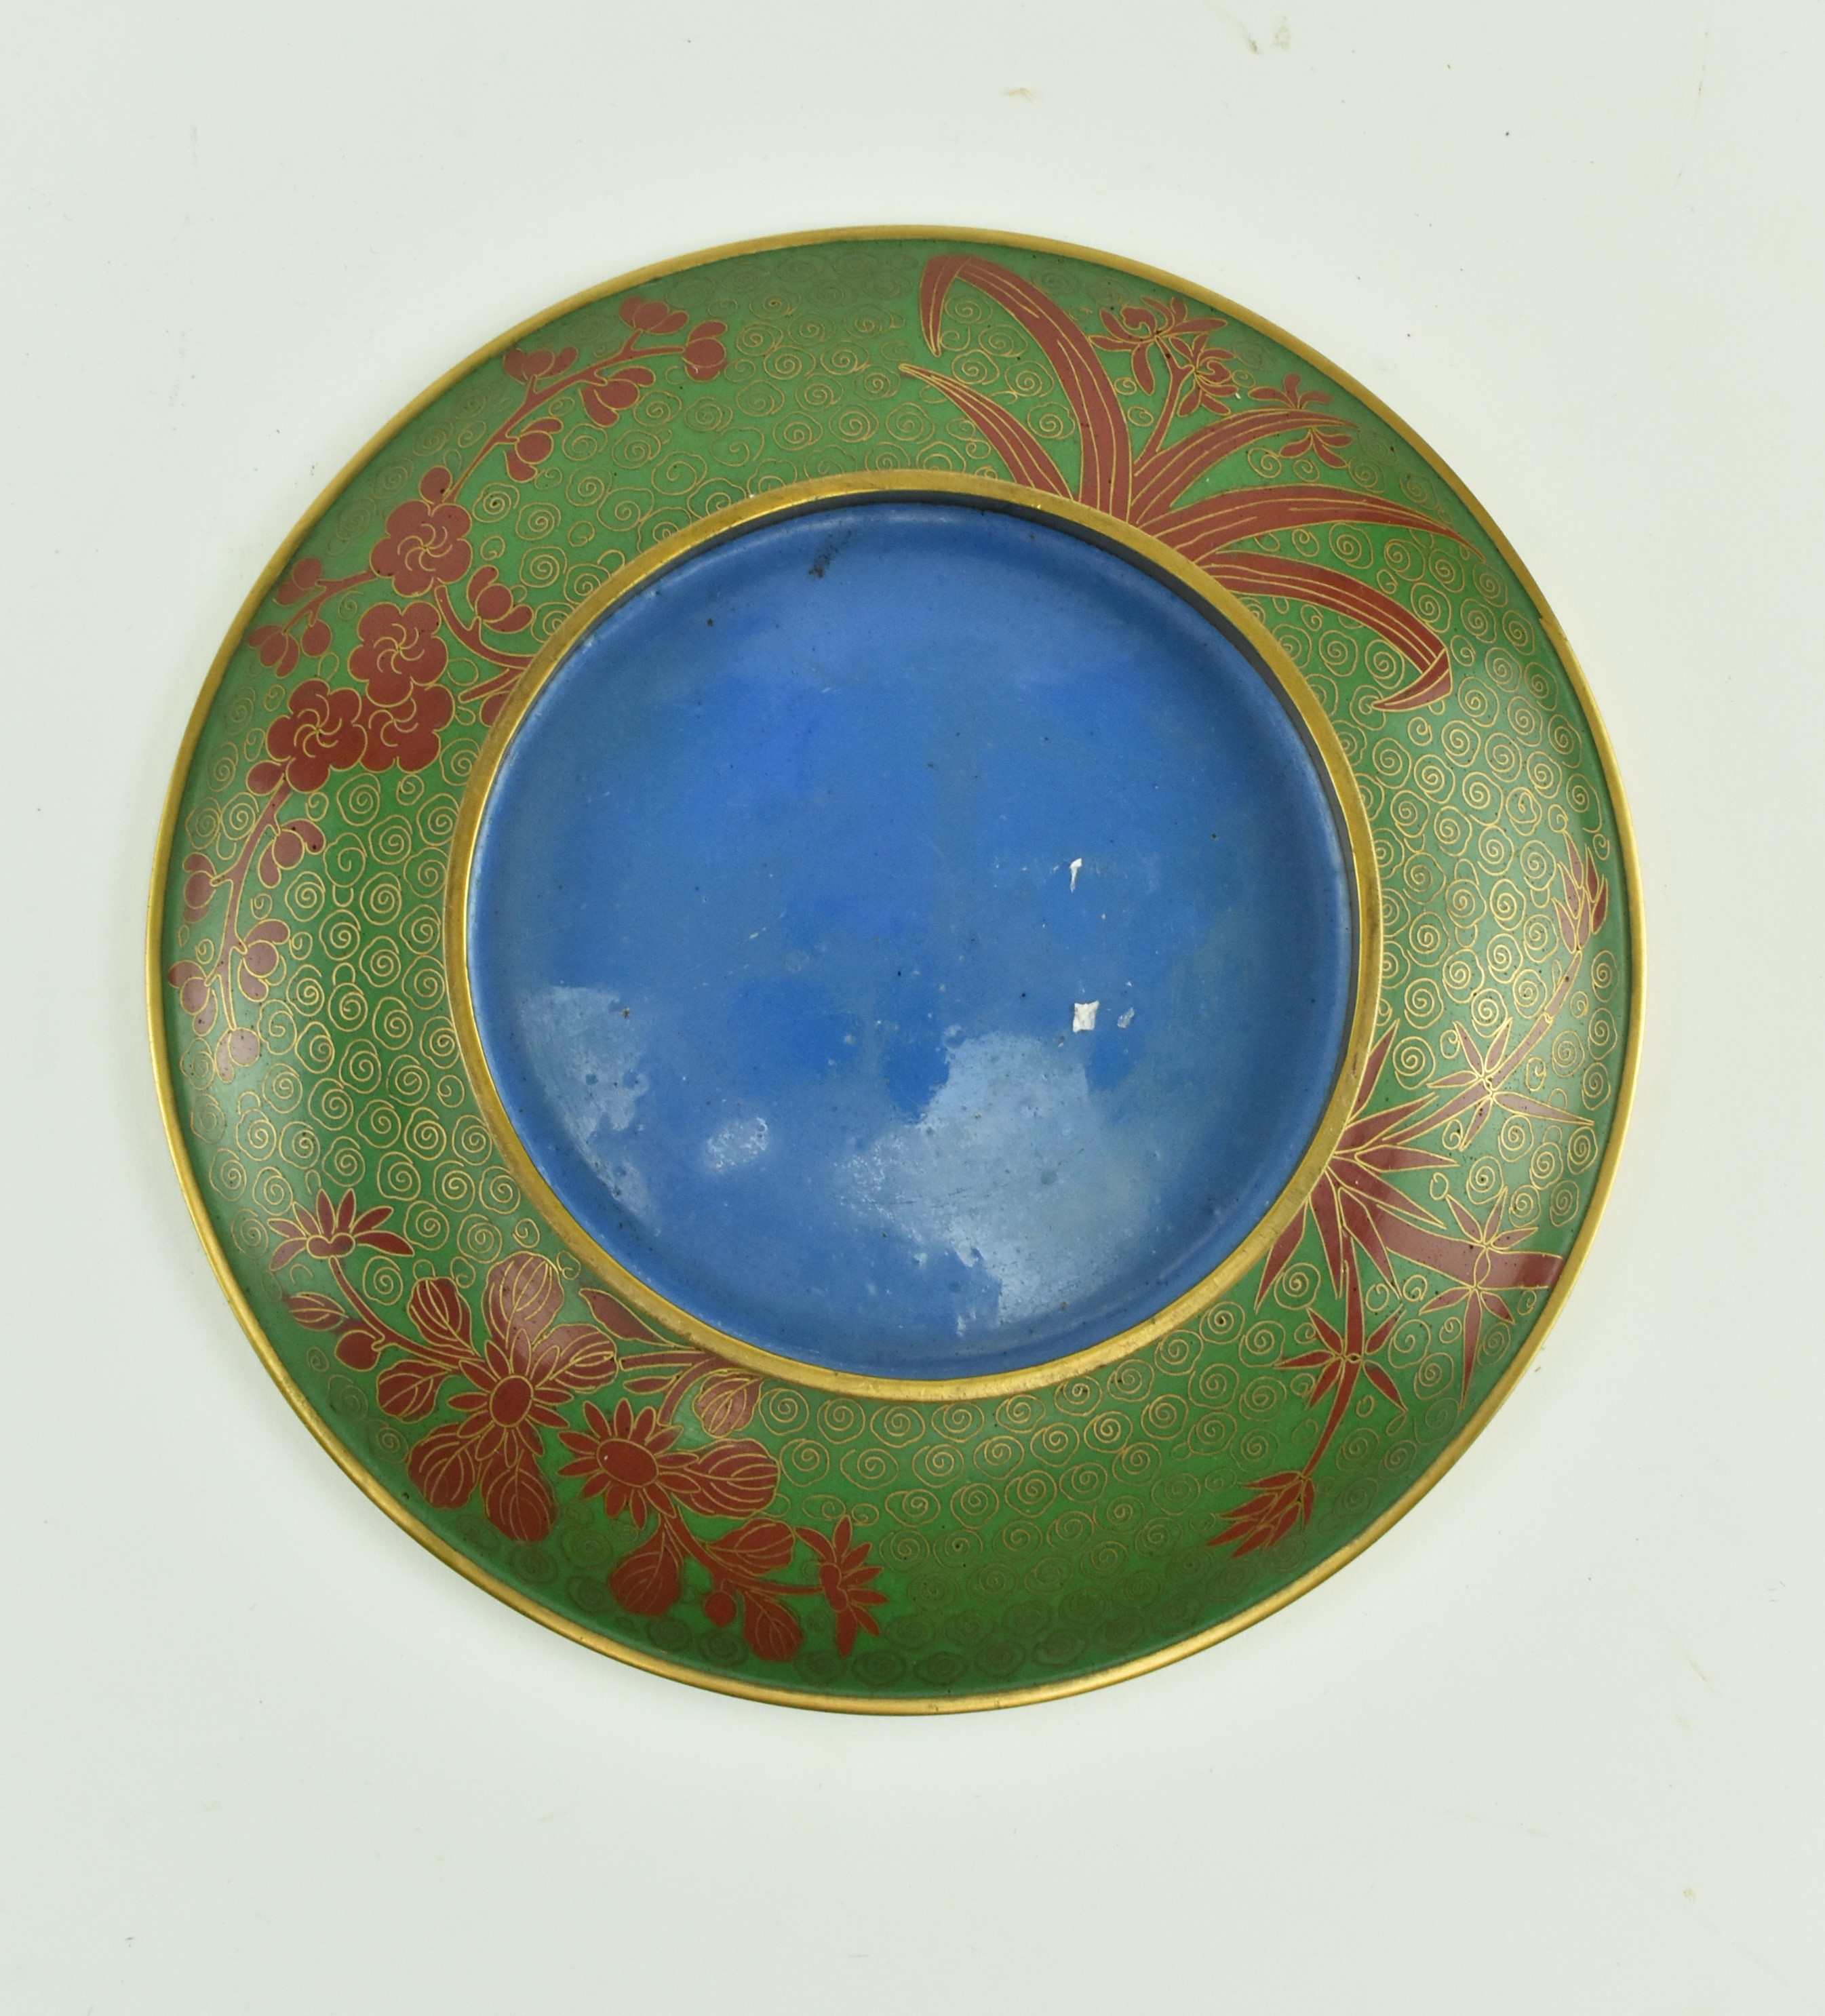 TWO 20TH CENTURY CHINESE CLOISONNE FLORAL BOWLS & A PLATE - Image 7 of 7